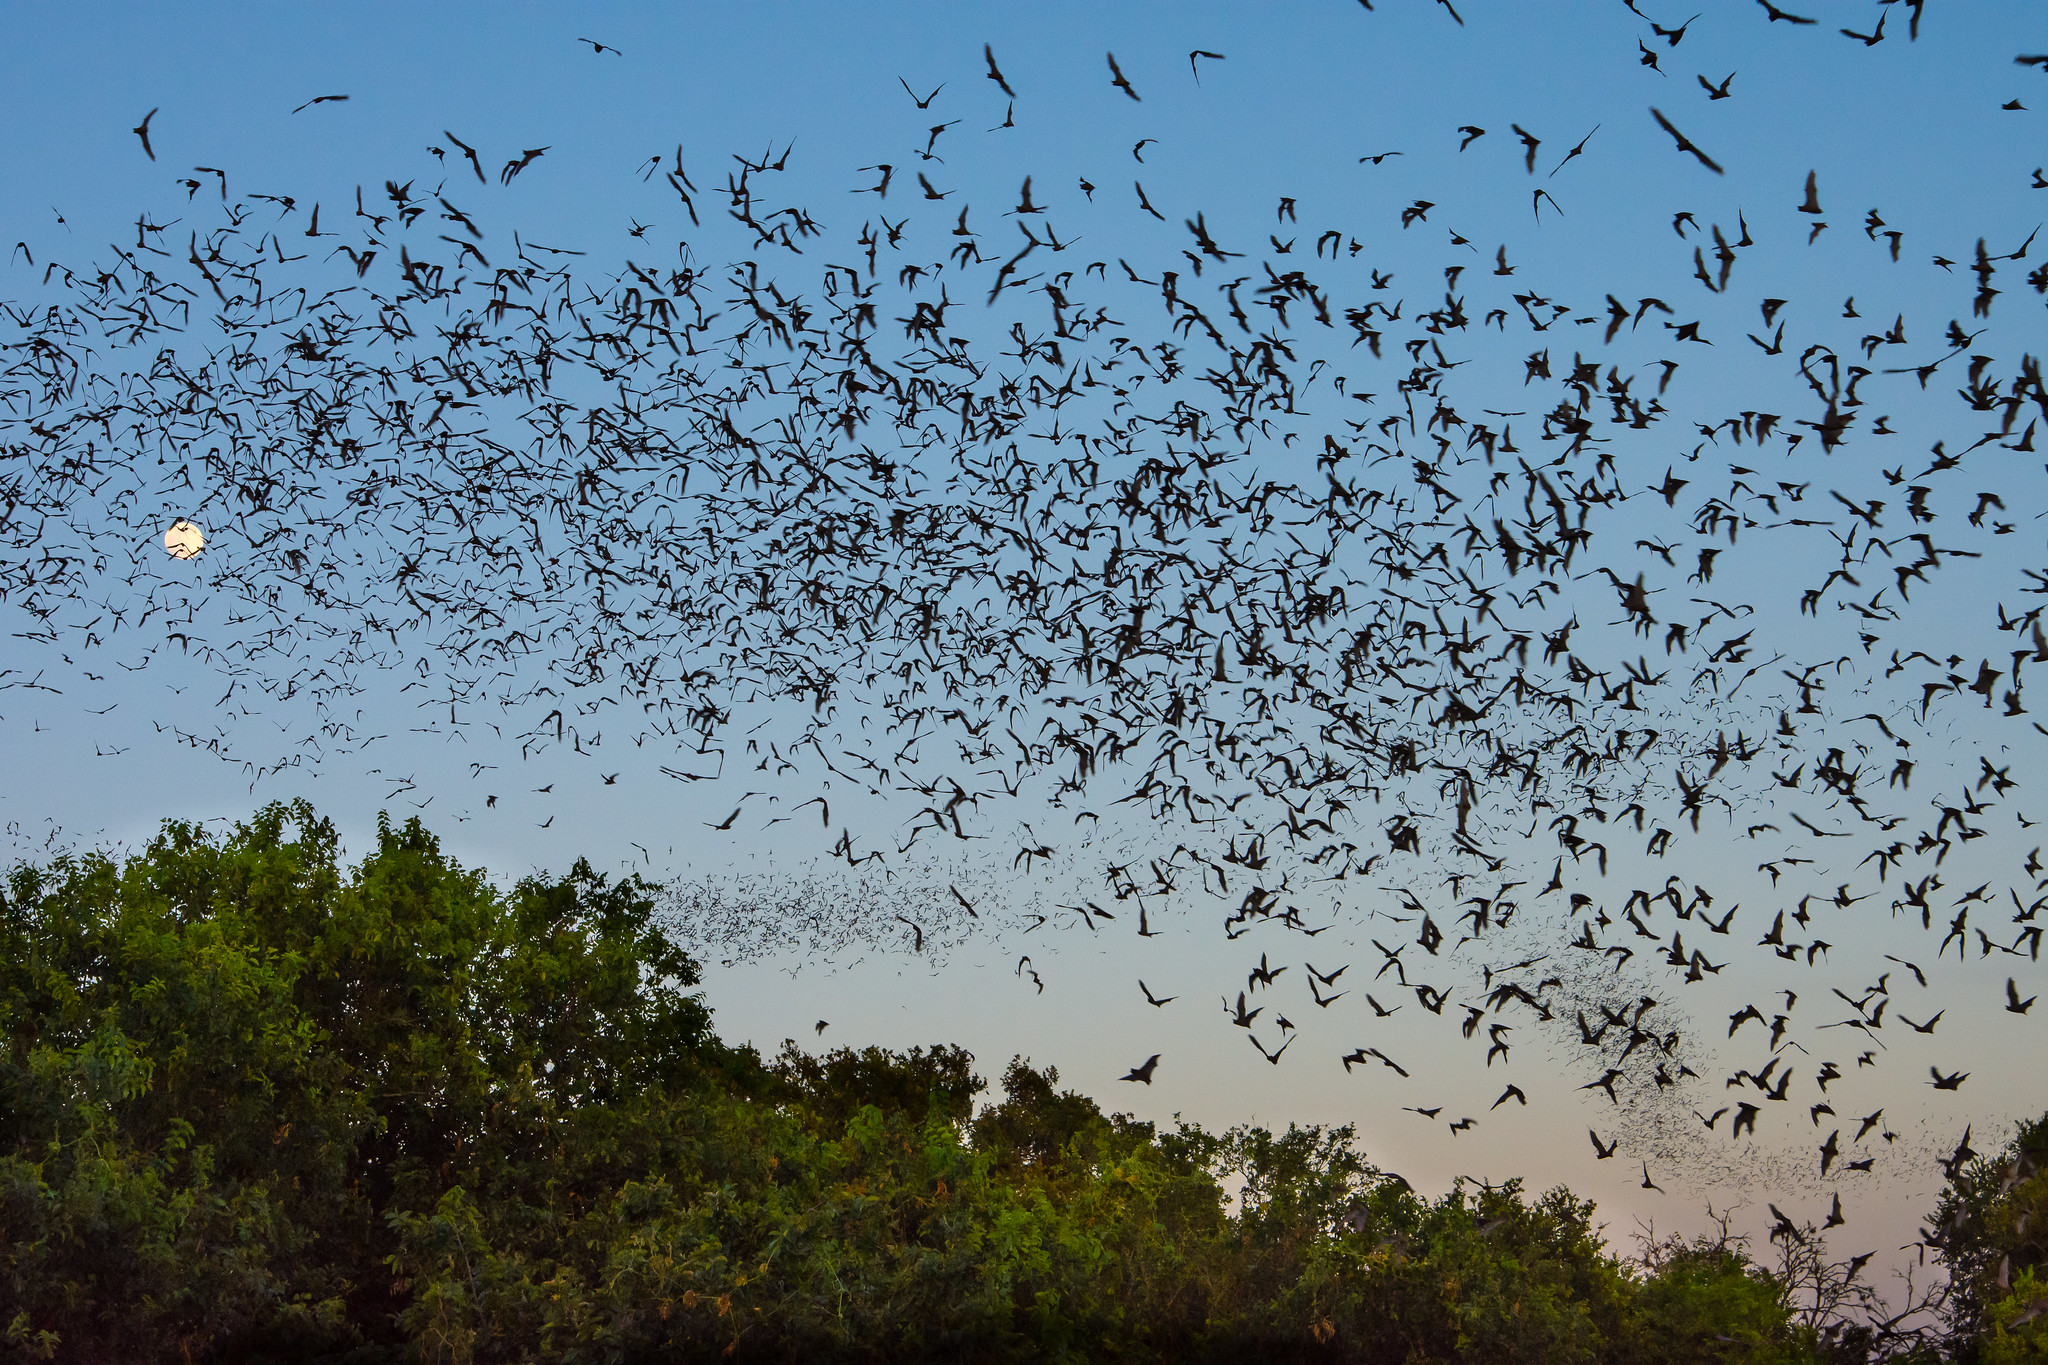 The sun sets as millions of bats take to the sky.